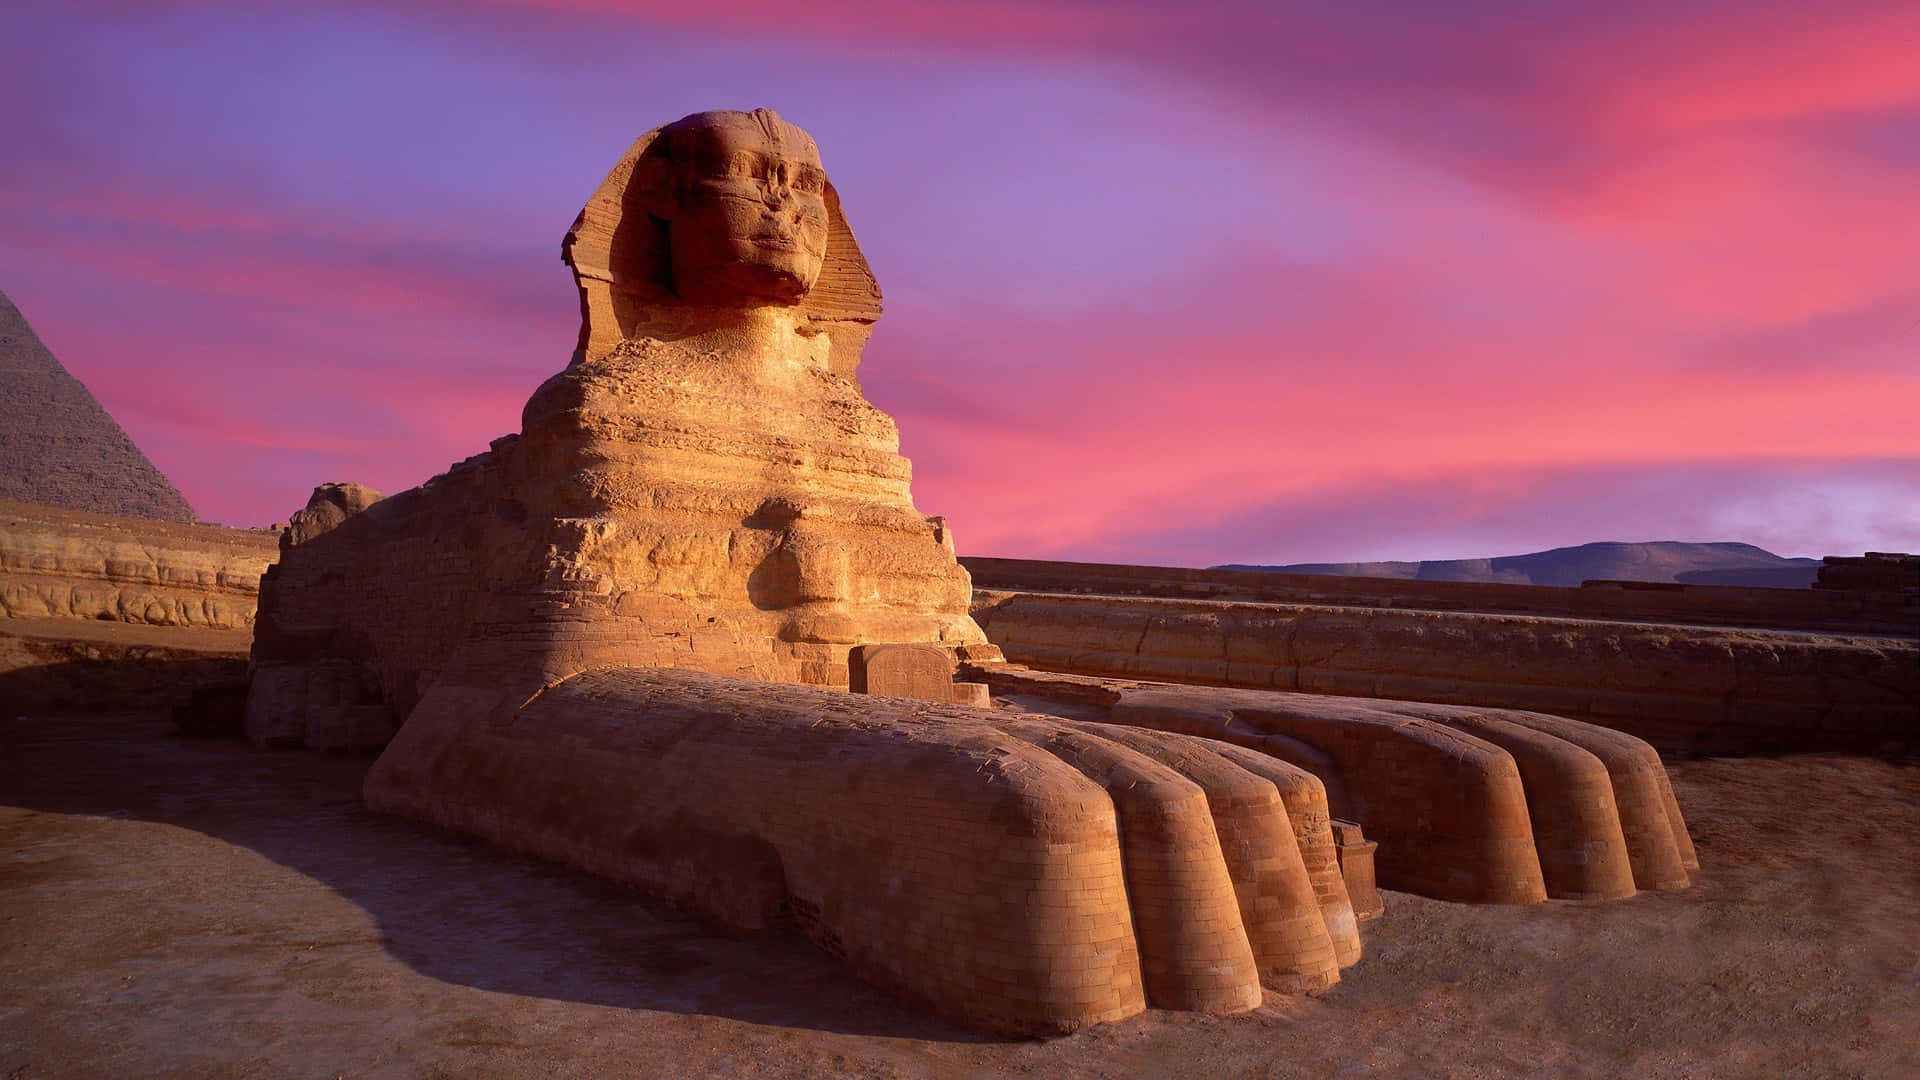 A Sphinx And Pyramids At Sunset Wallpaper